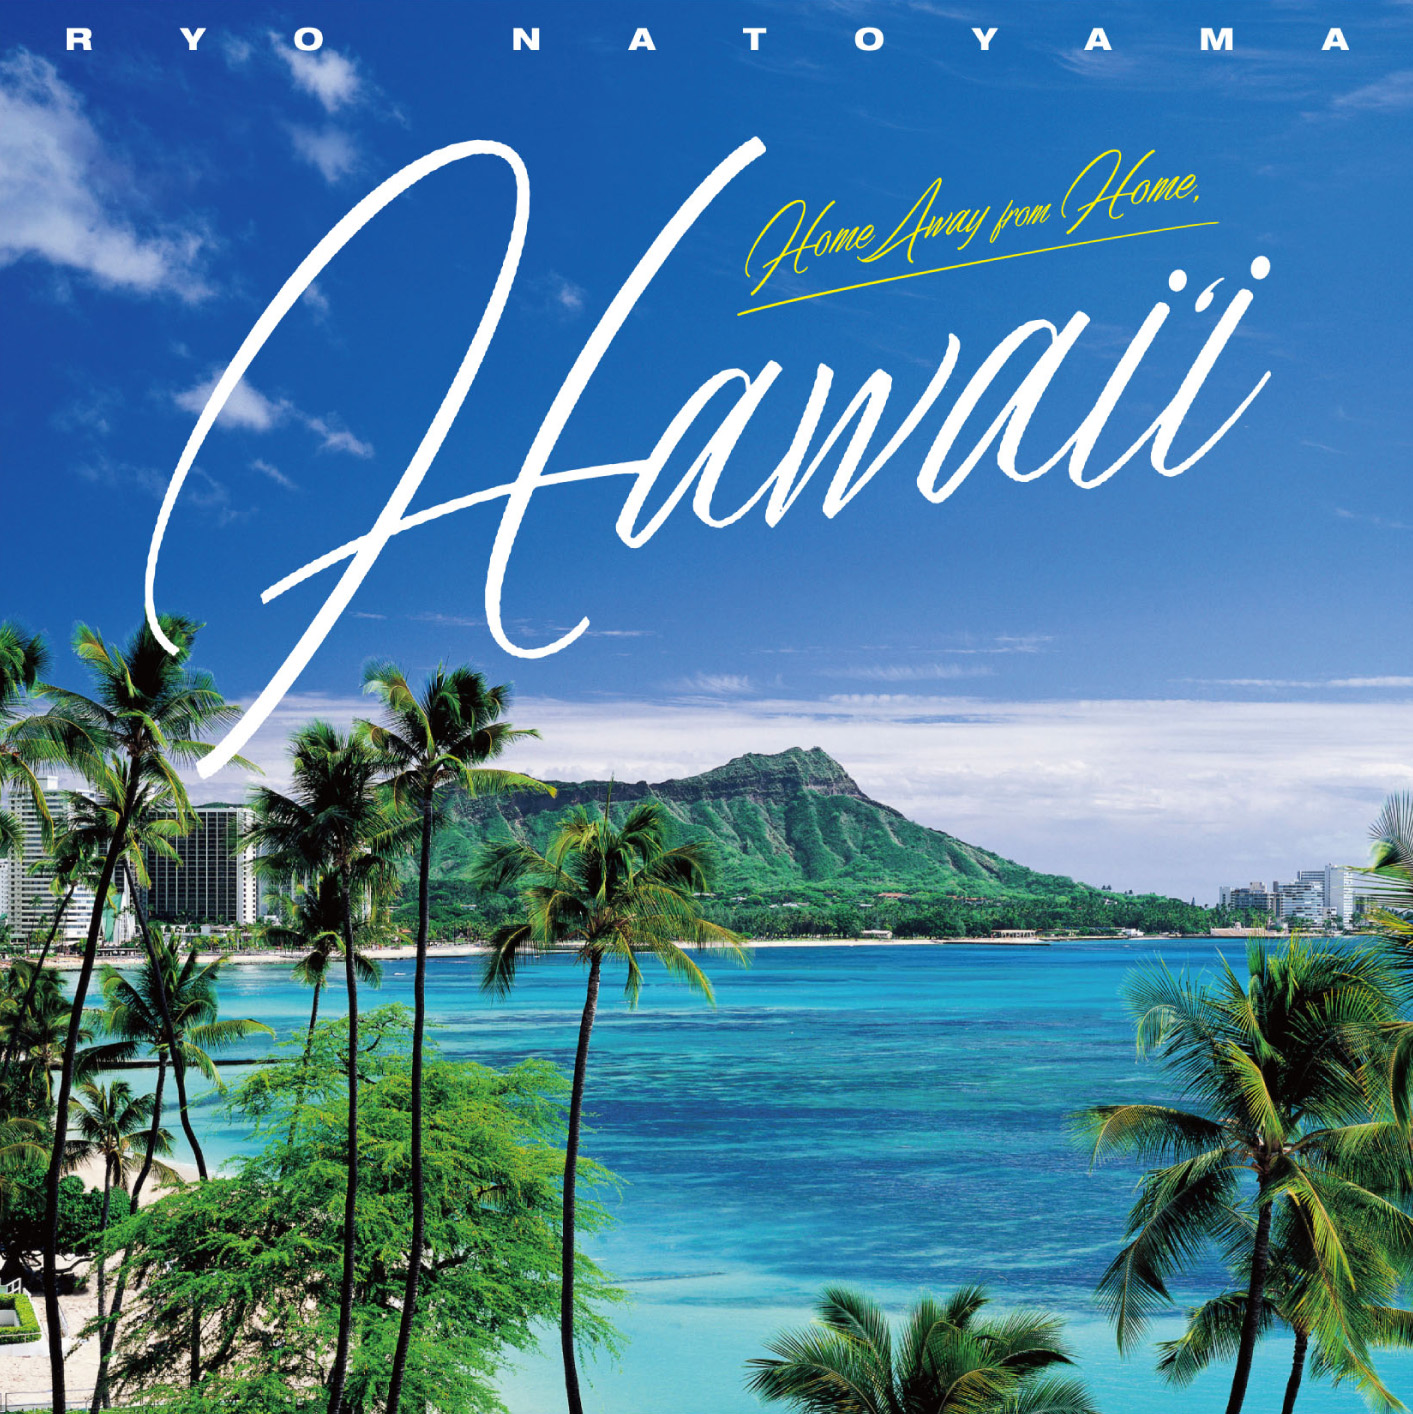 「Home Away from Home,“HAWAI‘I」 ホーム・アウェイ・フロム・ホーム“ハワイ”